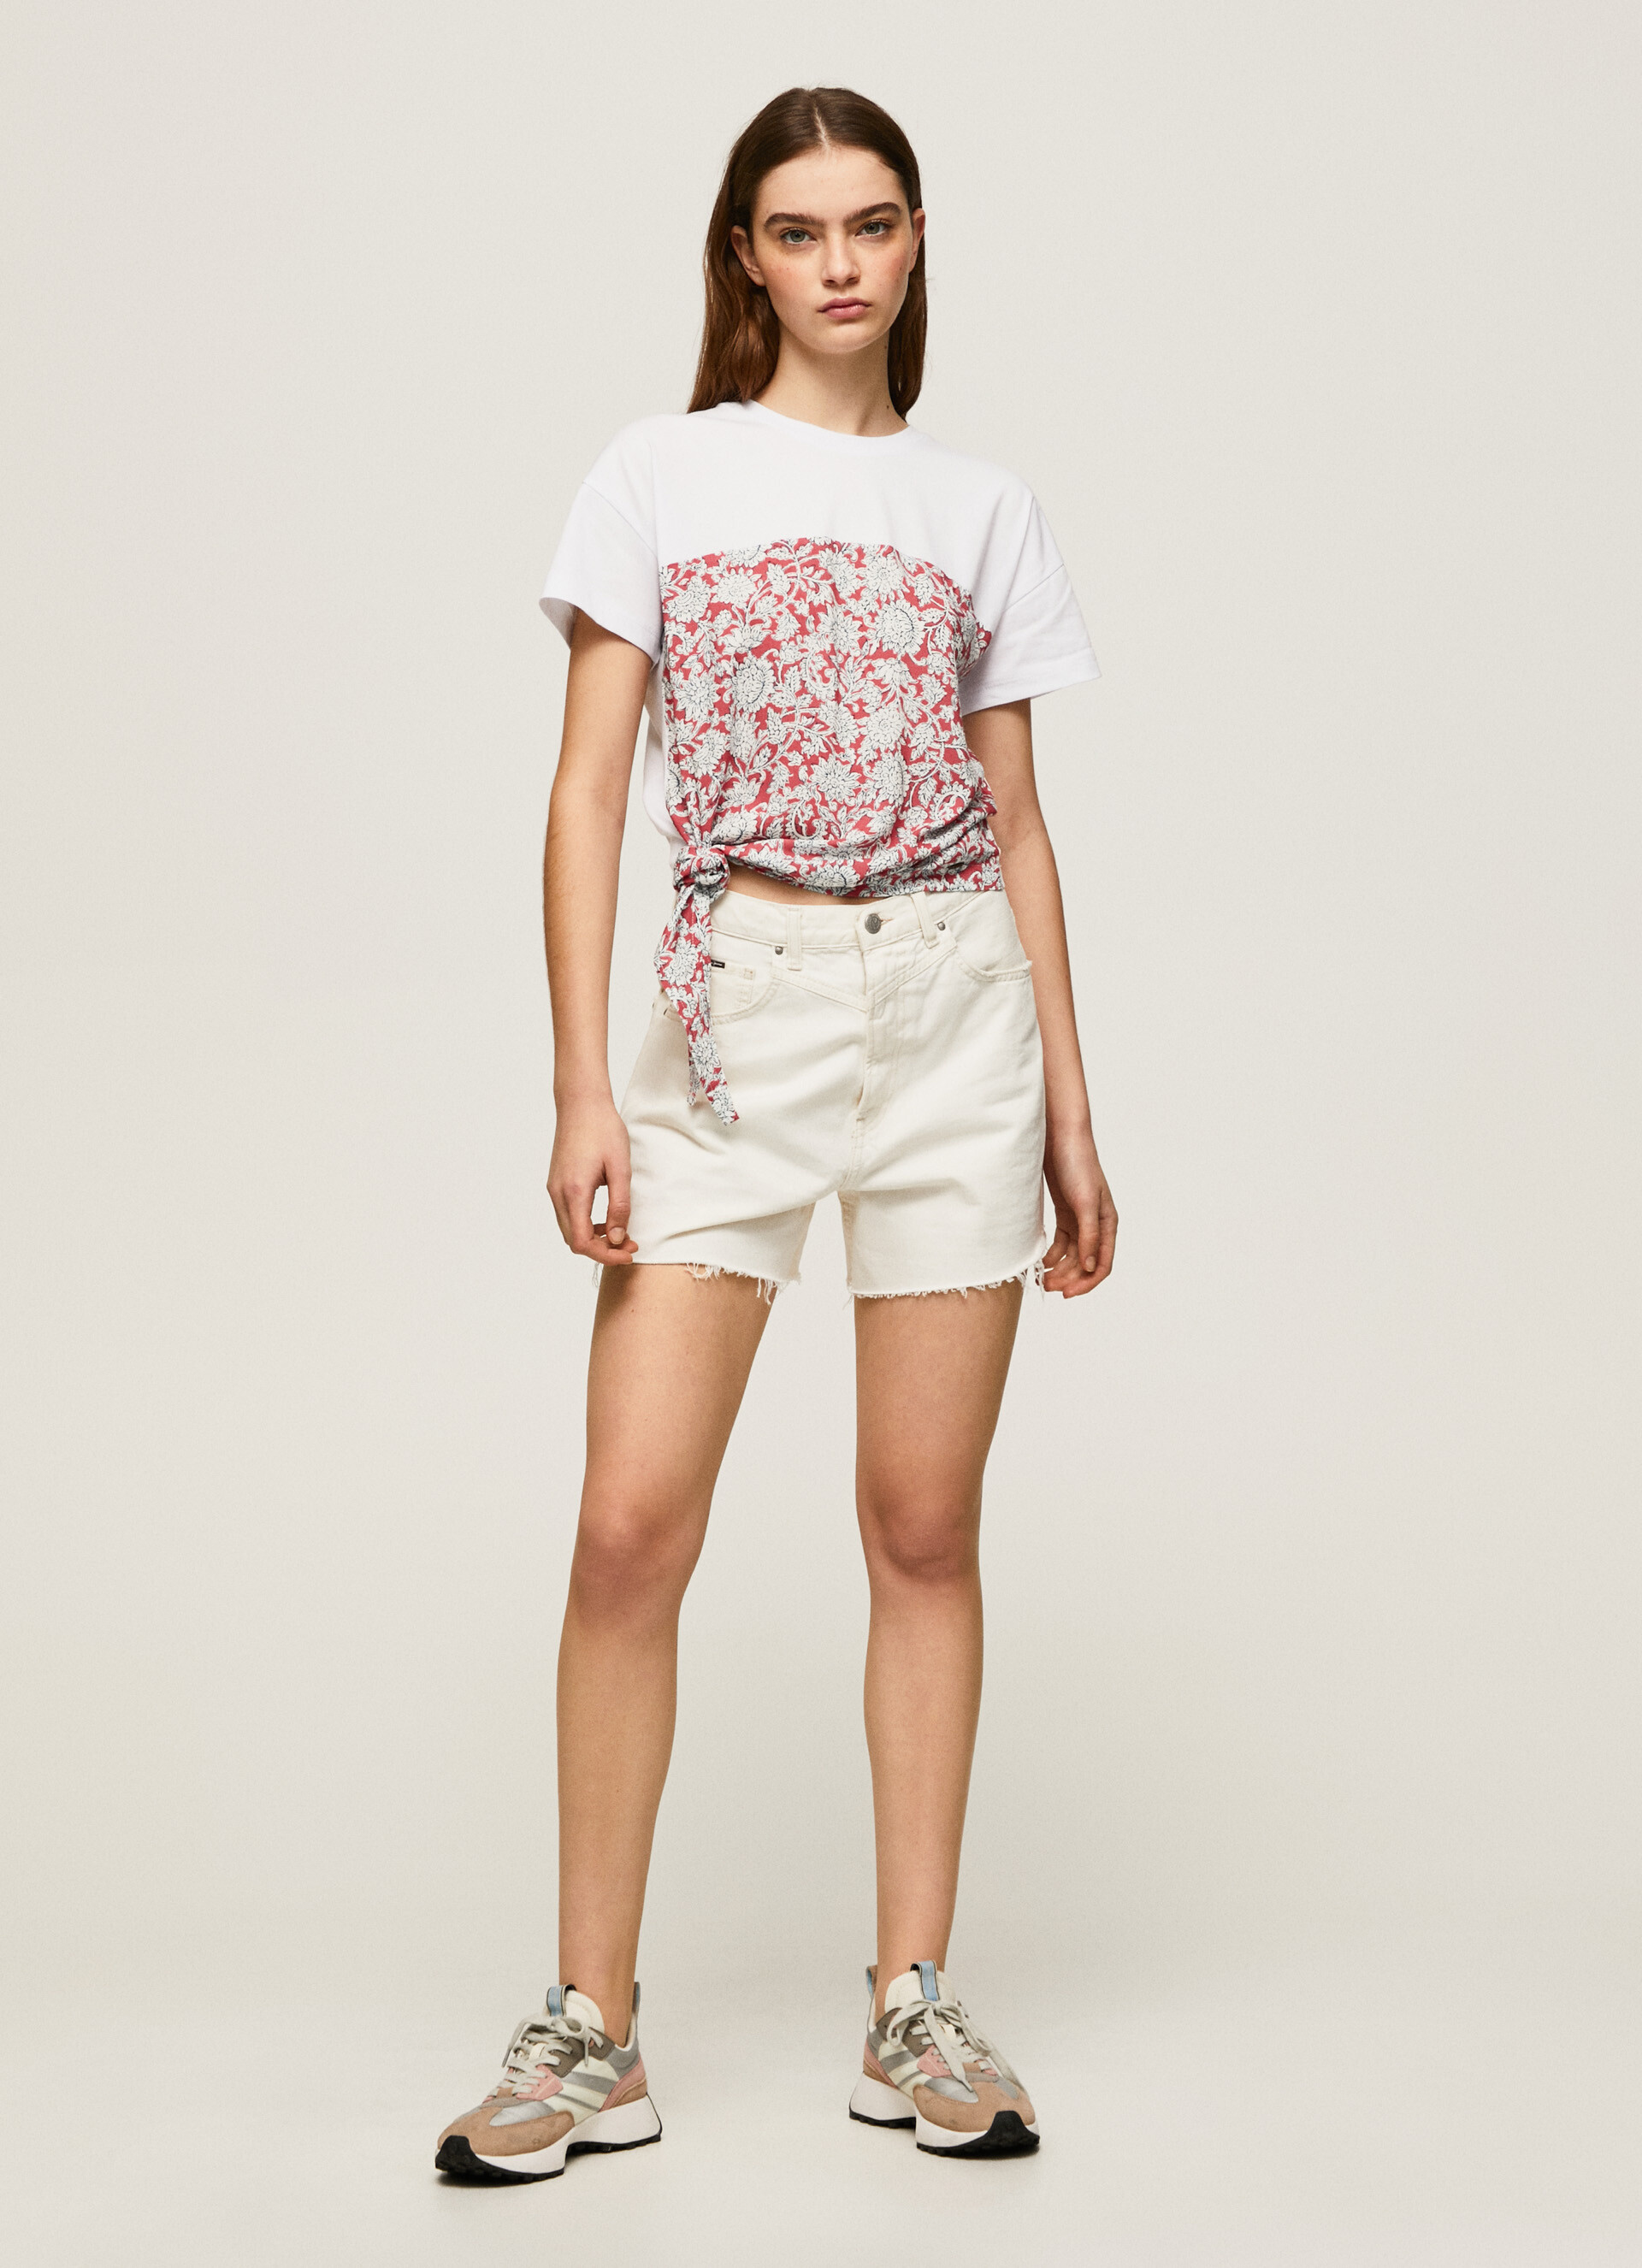 Pepe Jeans - T-shirt a fantasia in cotone, Rosso, large image number 5